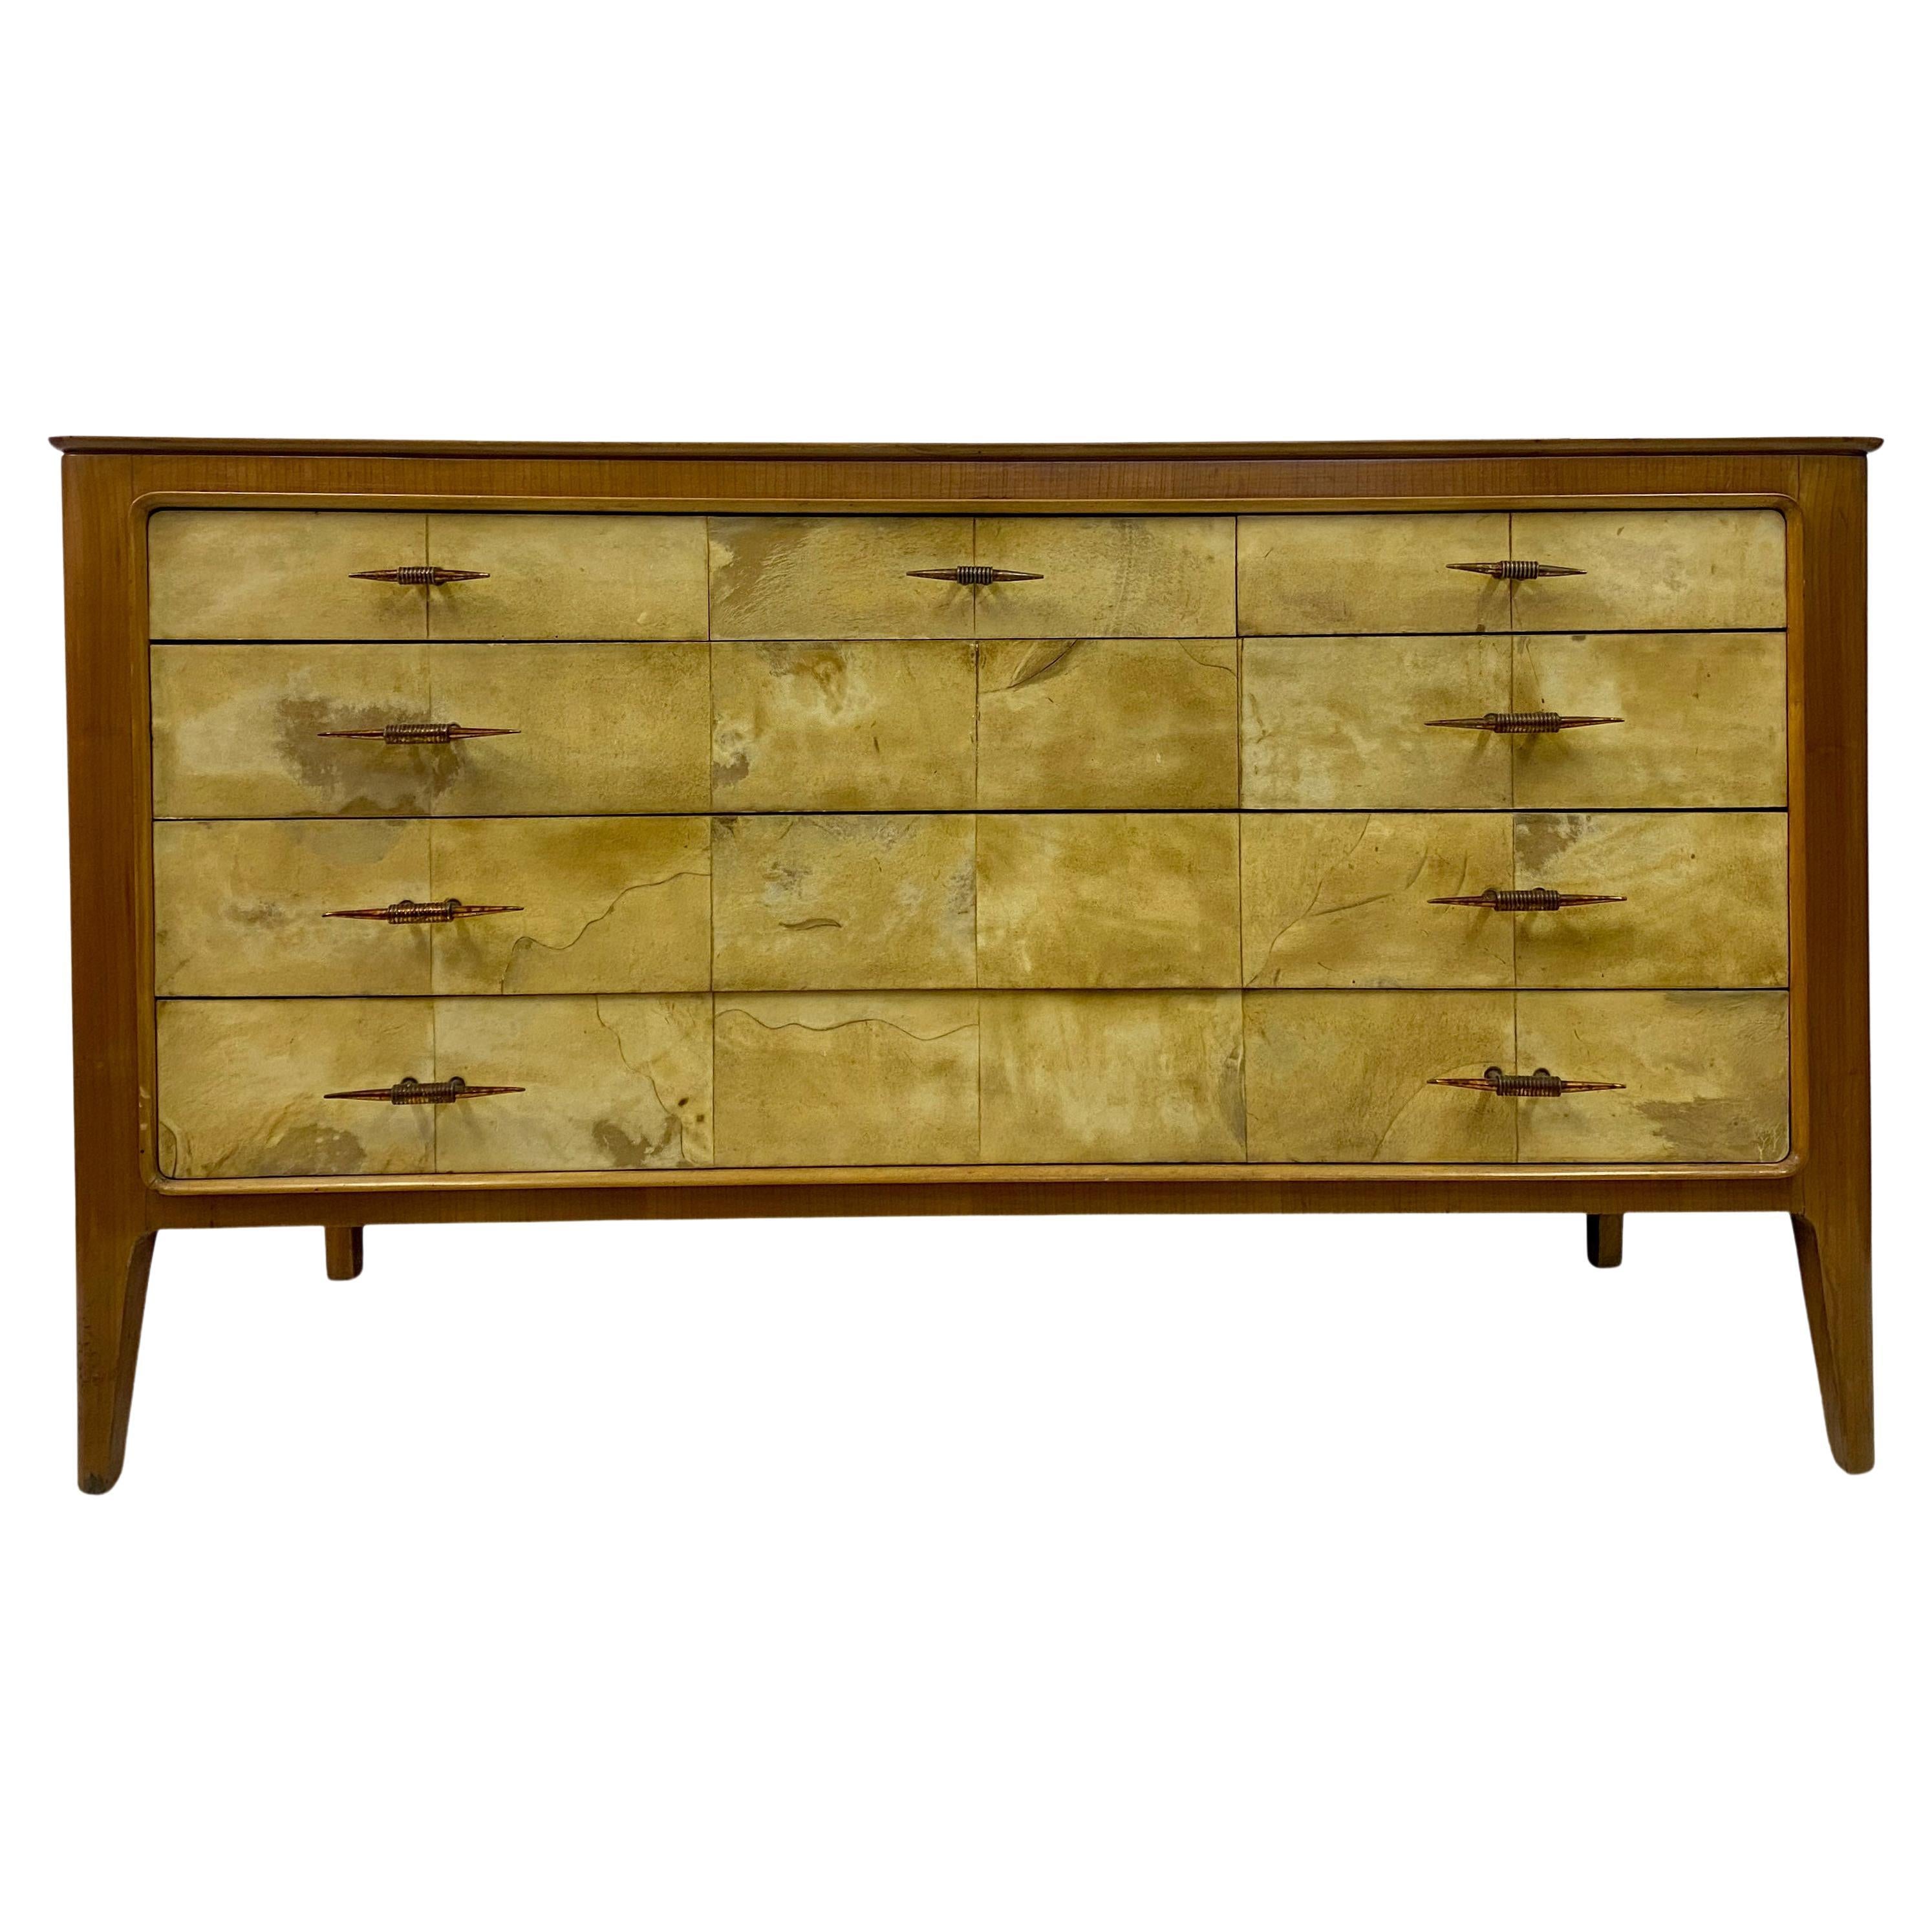 1950s, Italian Parchment and Cherry Wood Chest of Drawers For Sale